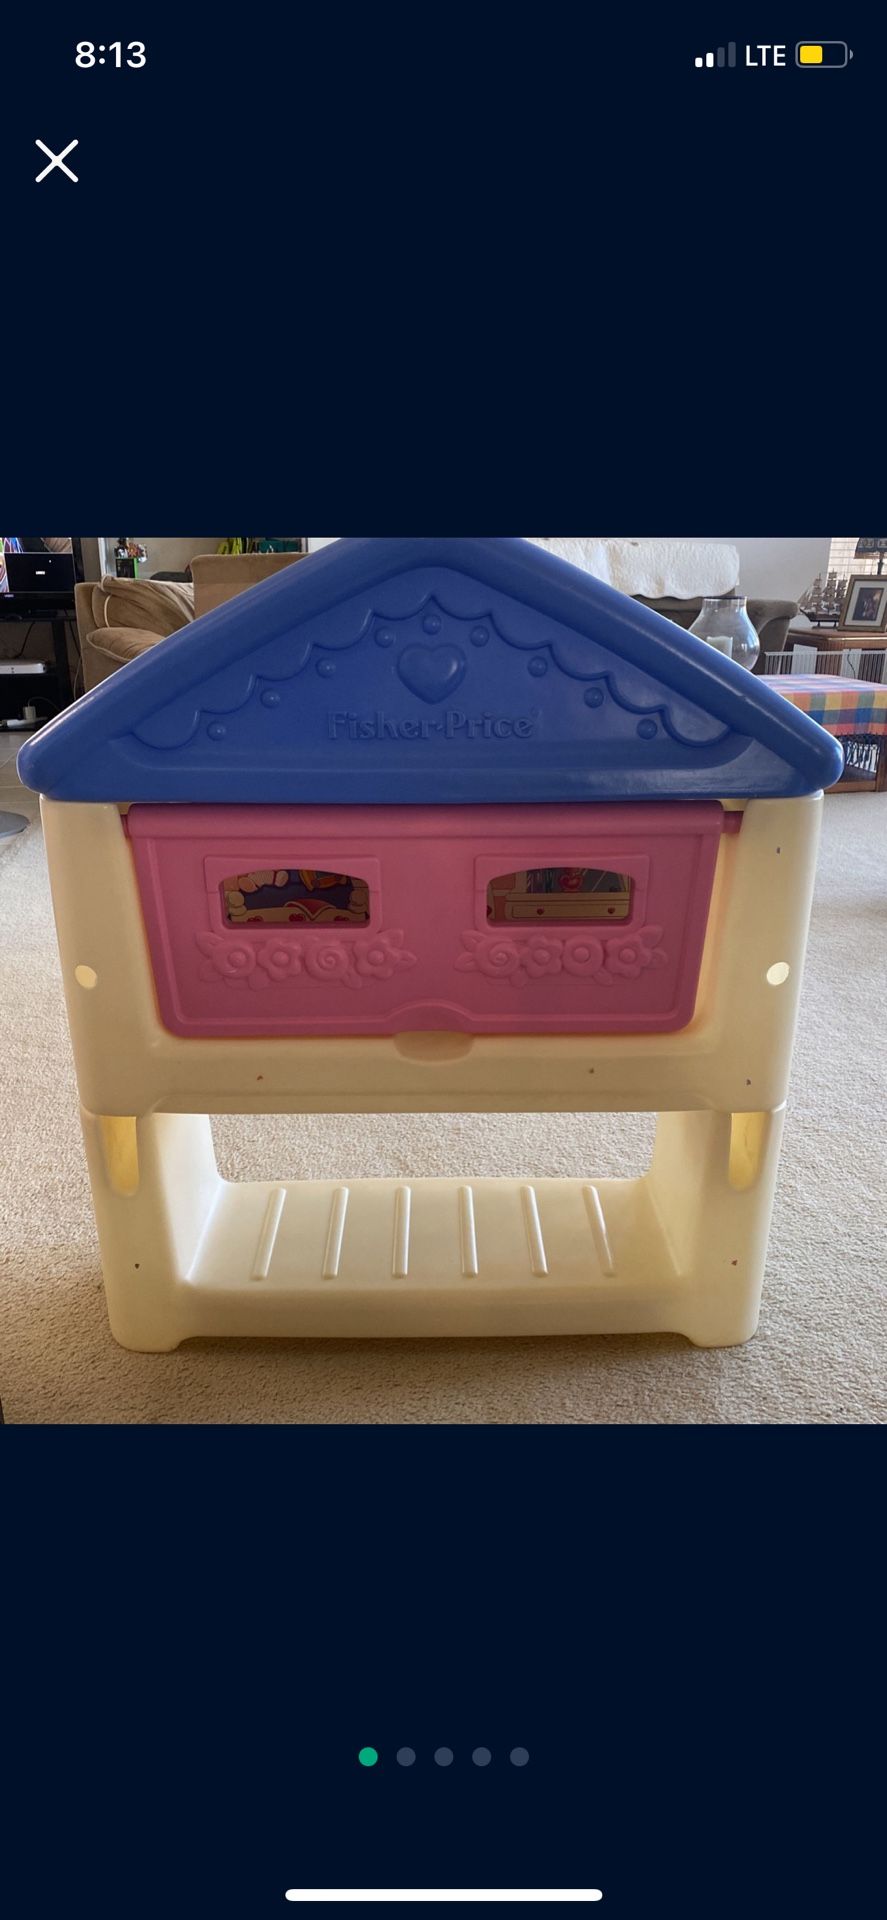 Fisher Price Dollhouse And Bench 